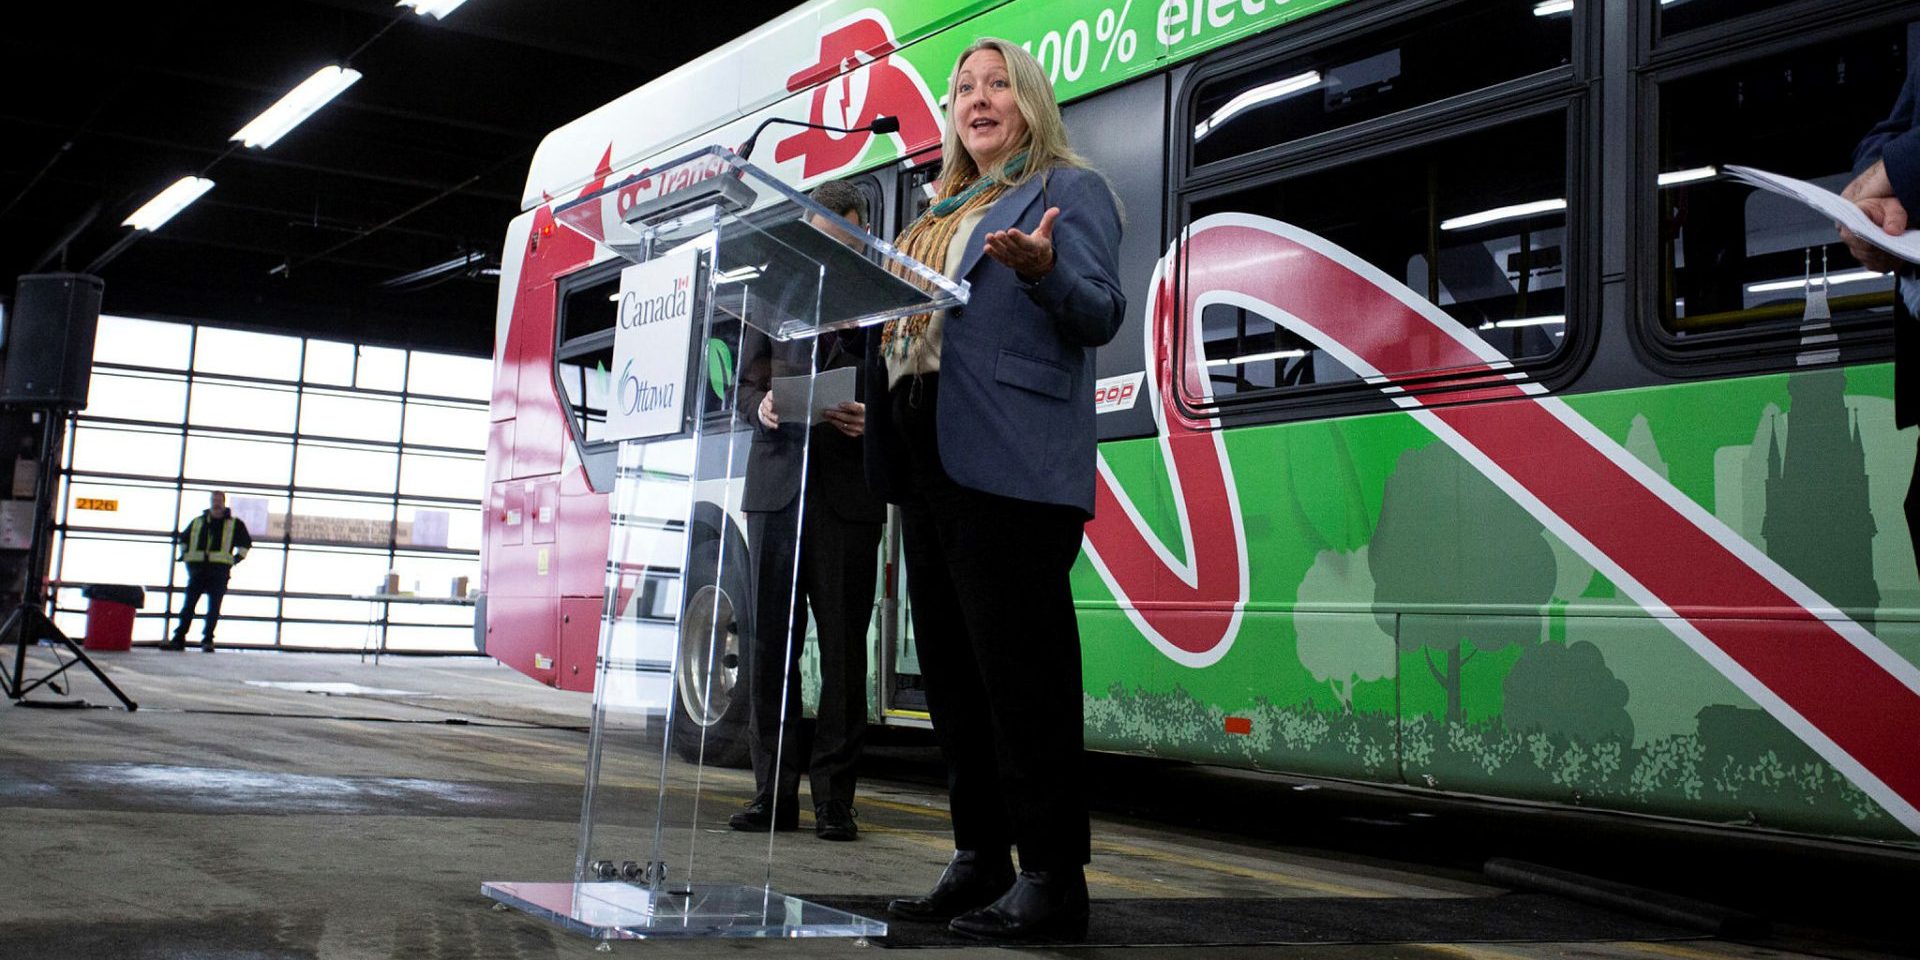 Treasury Board President Mona Fortier makes an announcement about zero-emission public transit infrastructure for the OCTranspo fleet in Ottawa on Jan. 19. The Hill Times photograph by Andrew Meade